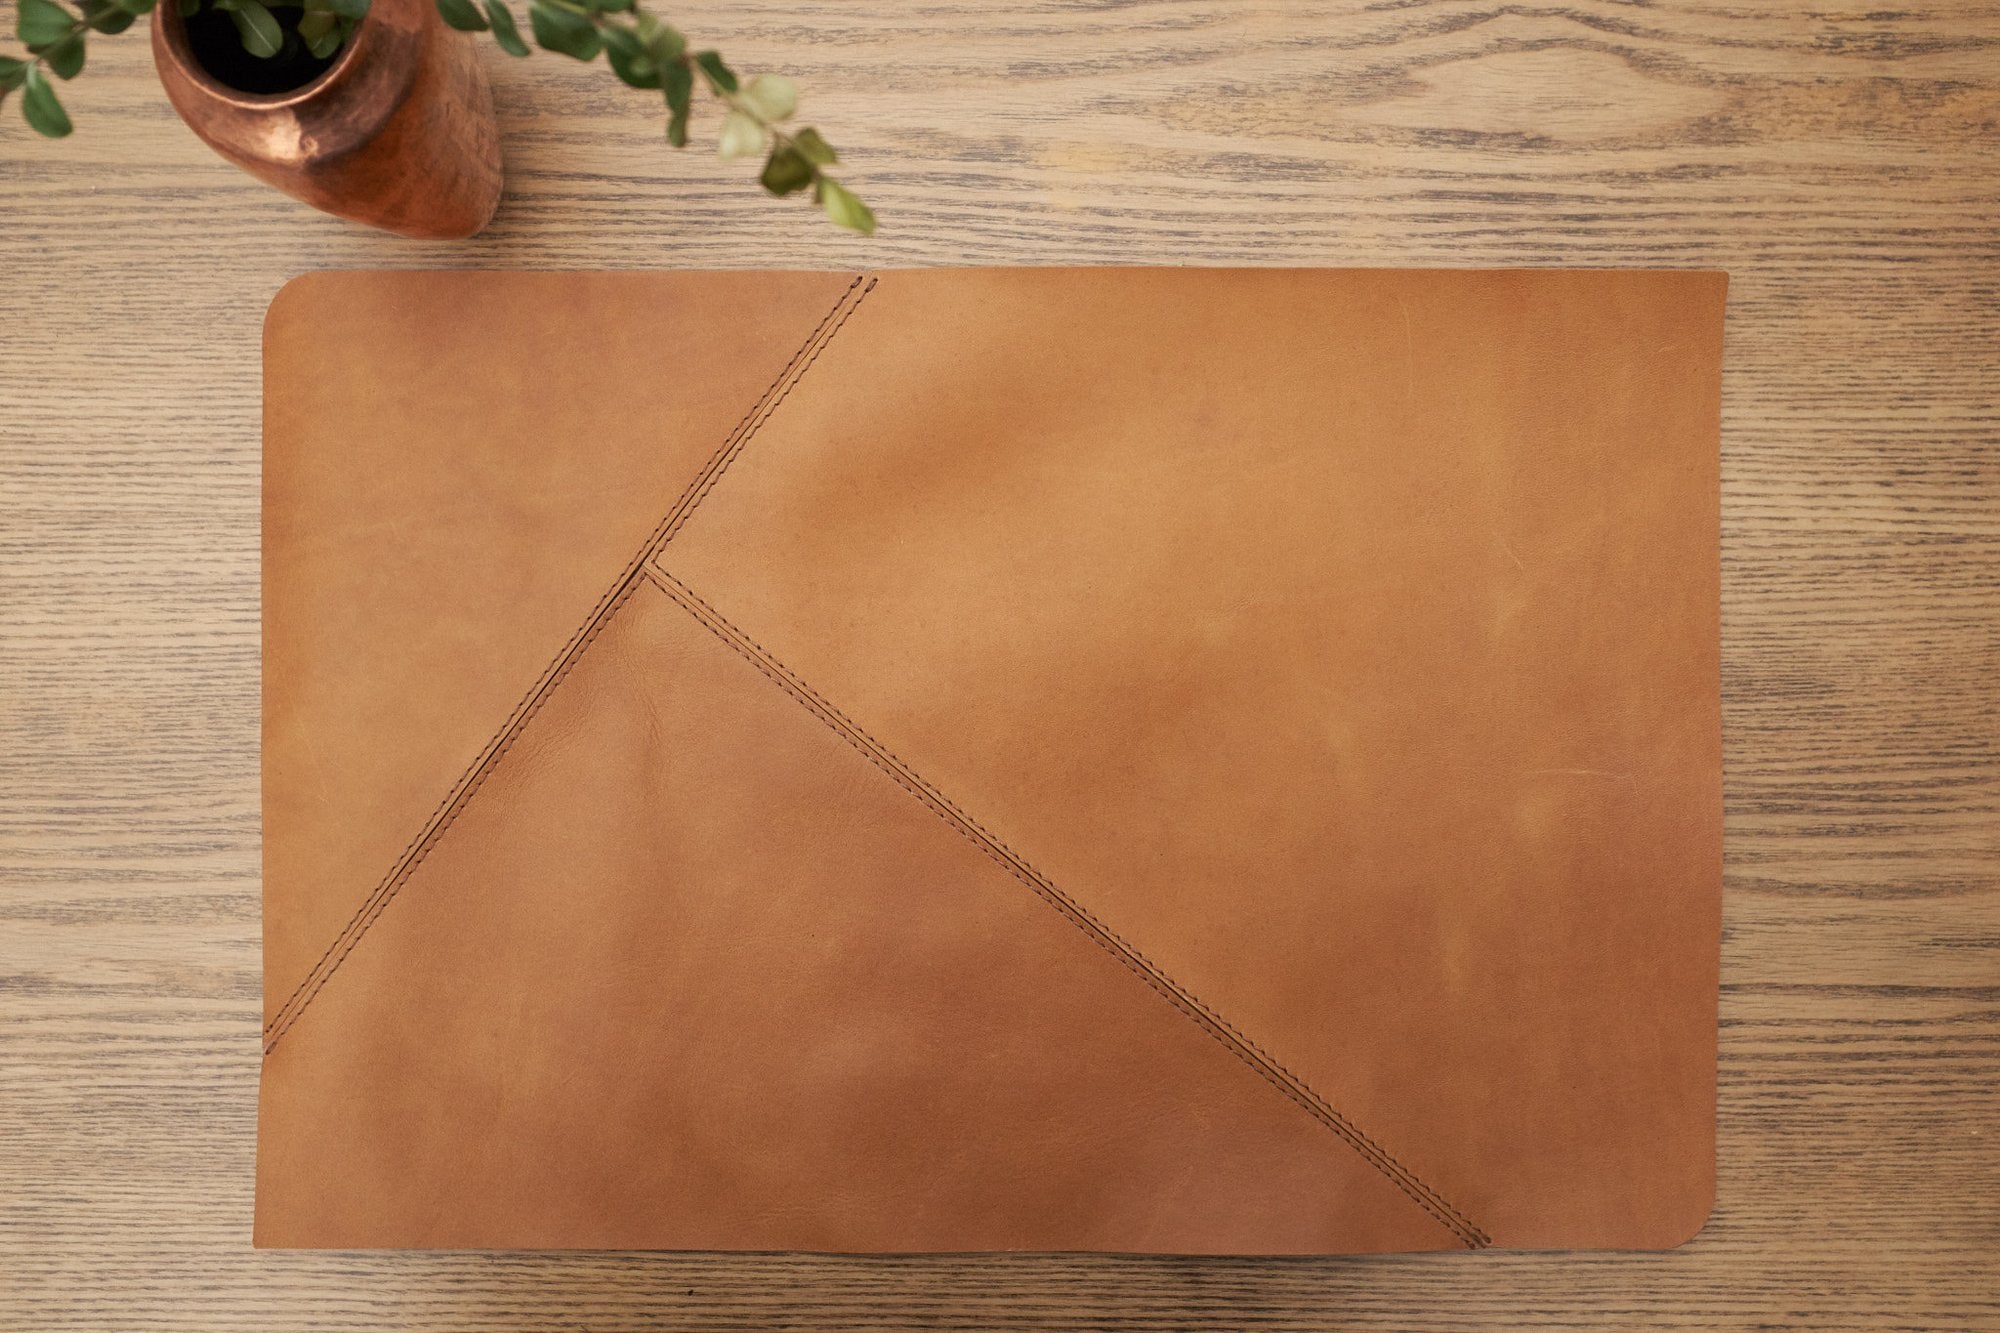 Cover. Leather Placemats Set Tan by Modoun Home Decor